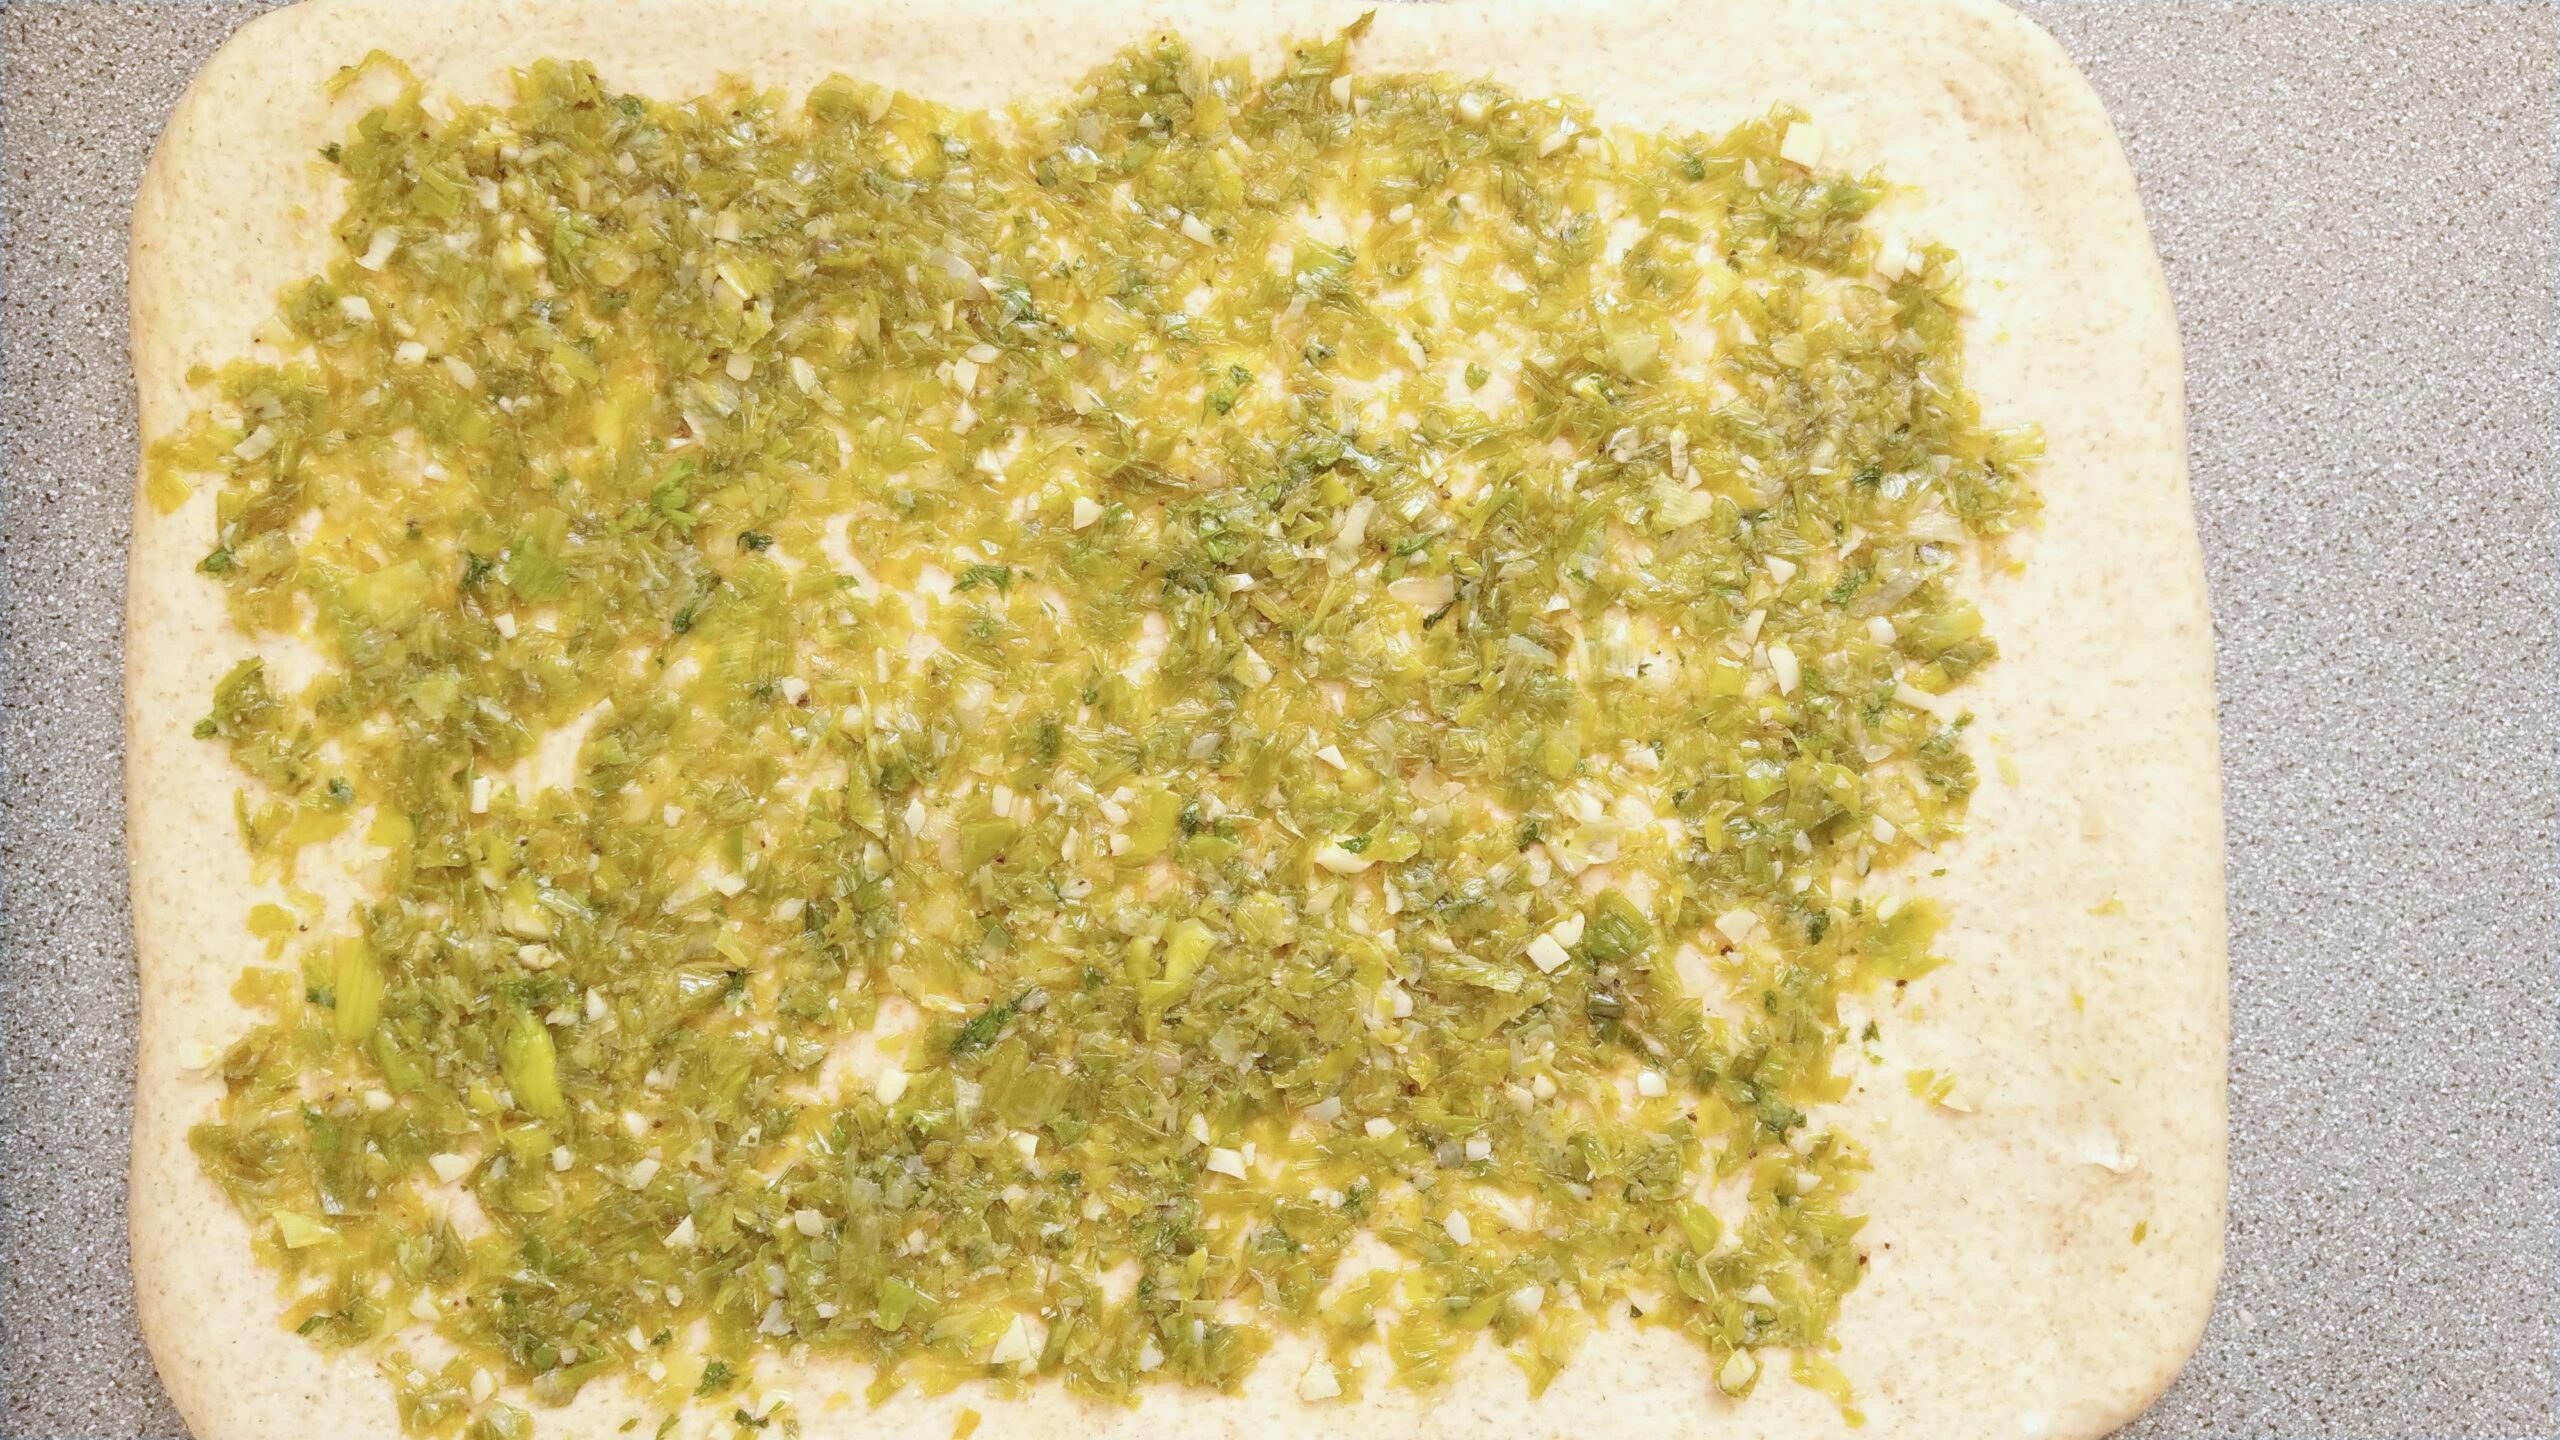 Dough with sauteed leeks and garlic spread on it